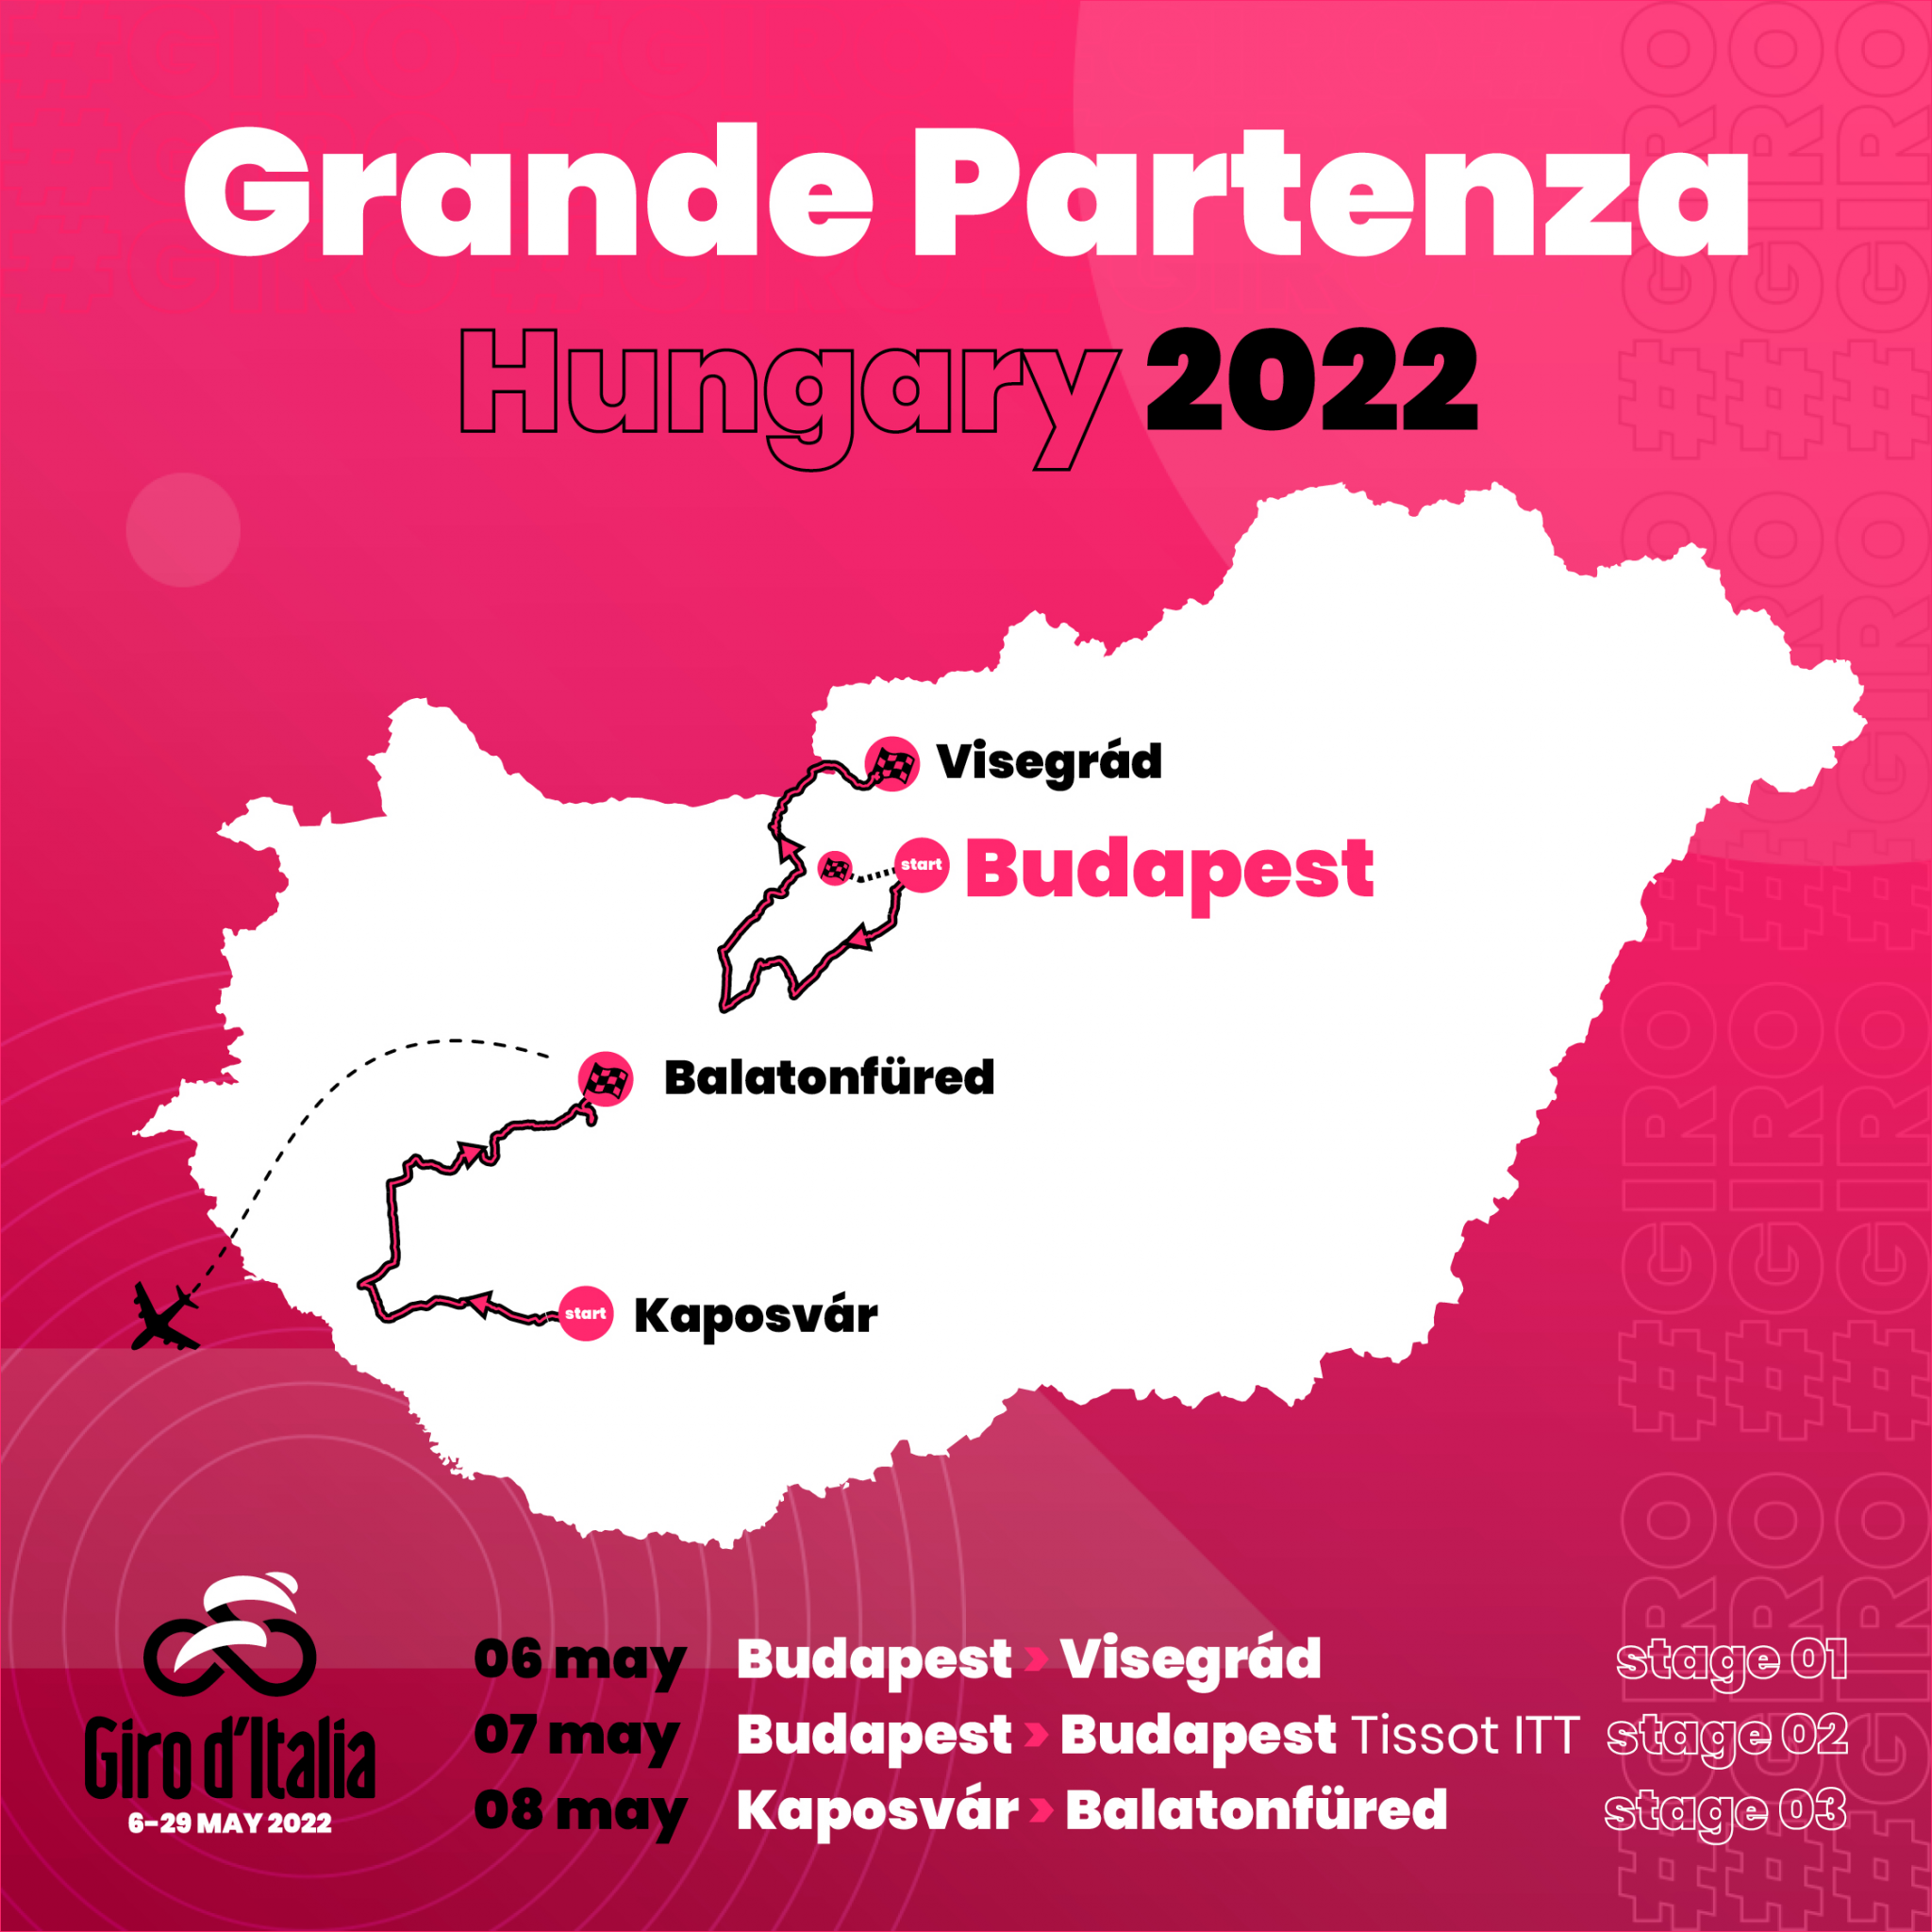 Budapest will host the opening stage of the Giro d'Italia on May 6 next year after having been denied the opportunity in 2020 due to COVID-19 ©Giro d'Italia